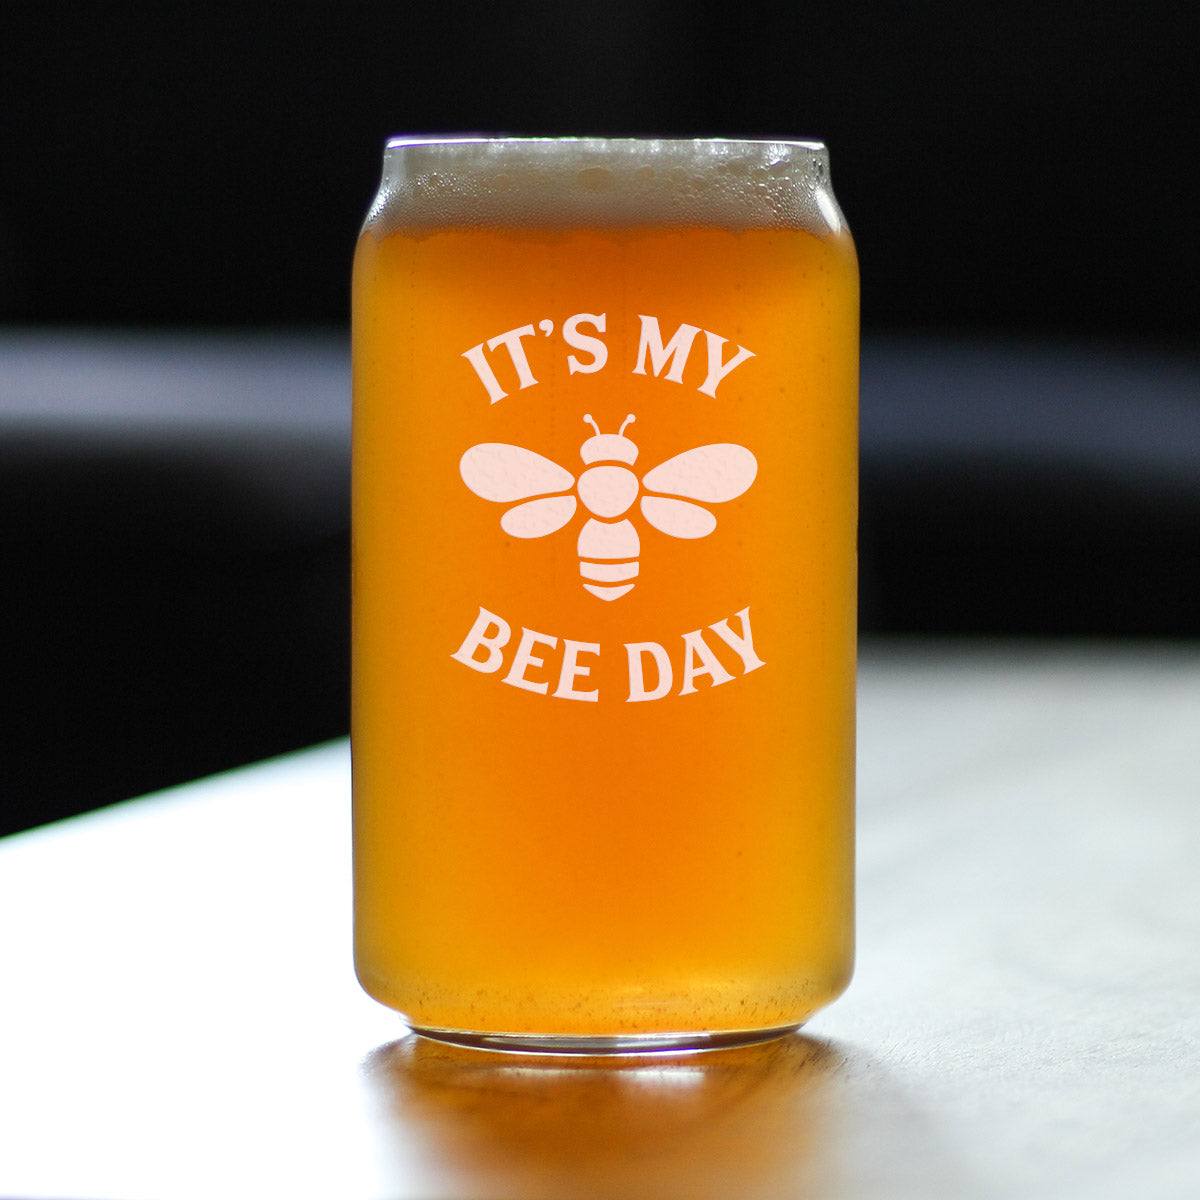 Bee Day - Funny Beer Can Pint Glass - Bumblebee Bday Party Decor for Men or Women Getting Older - 16 oz